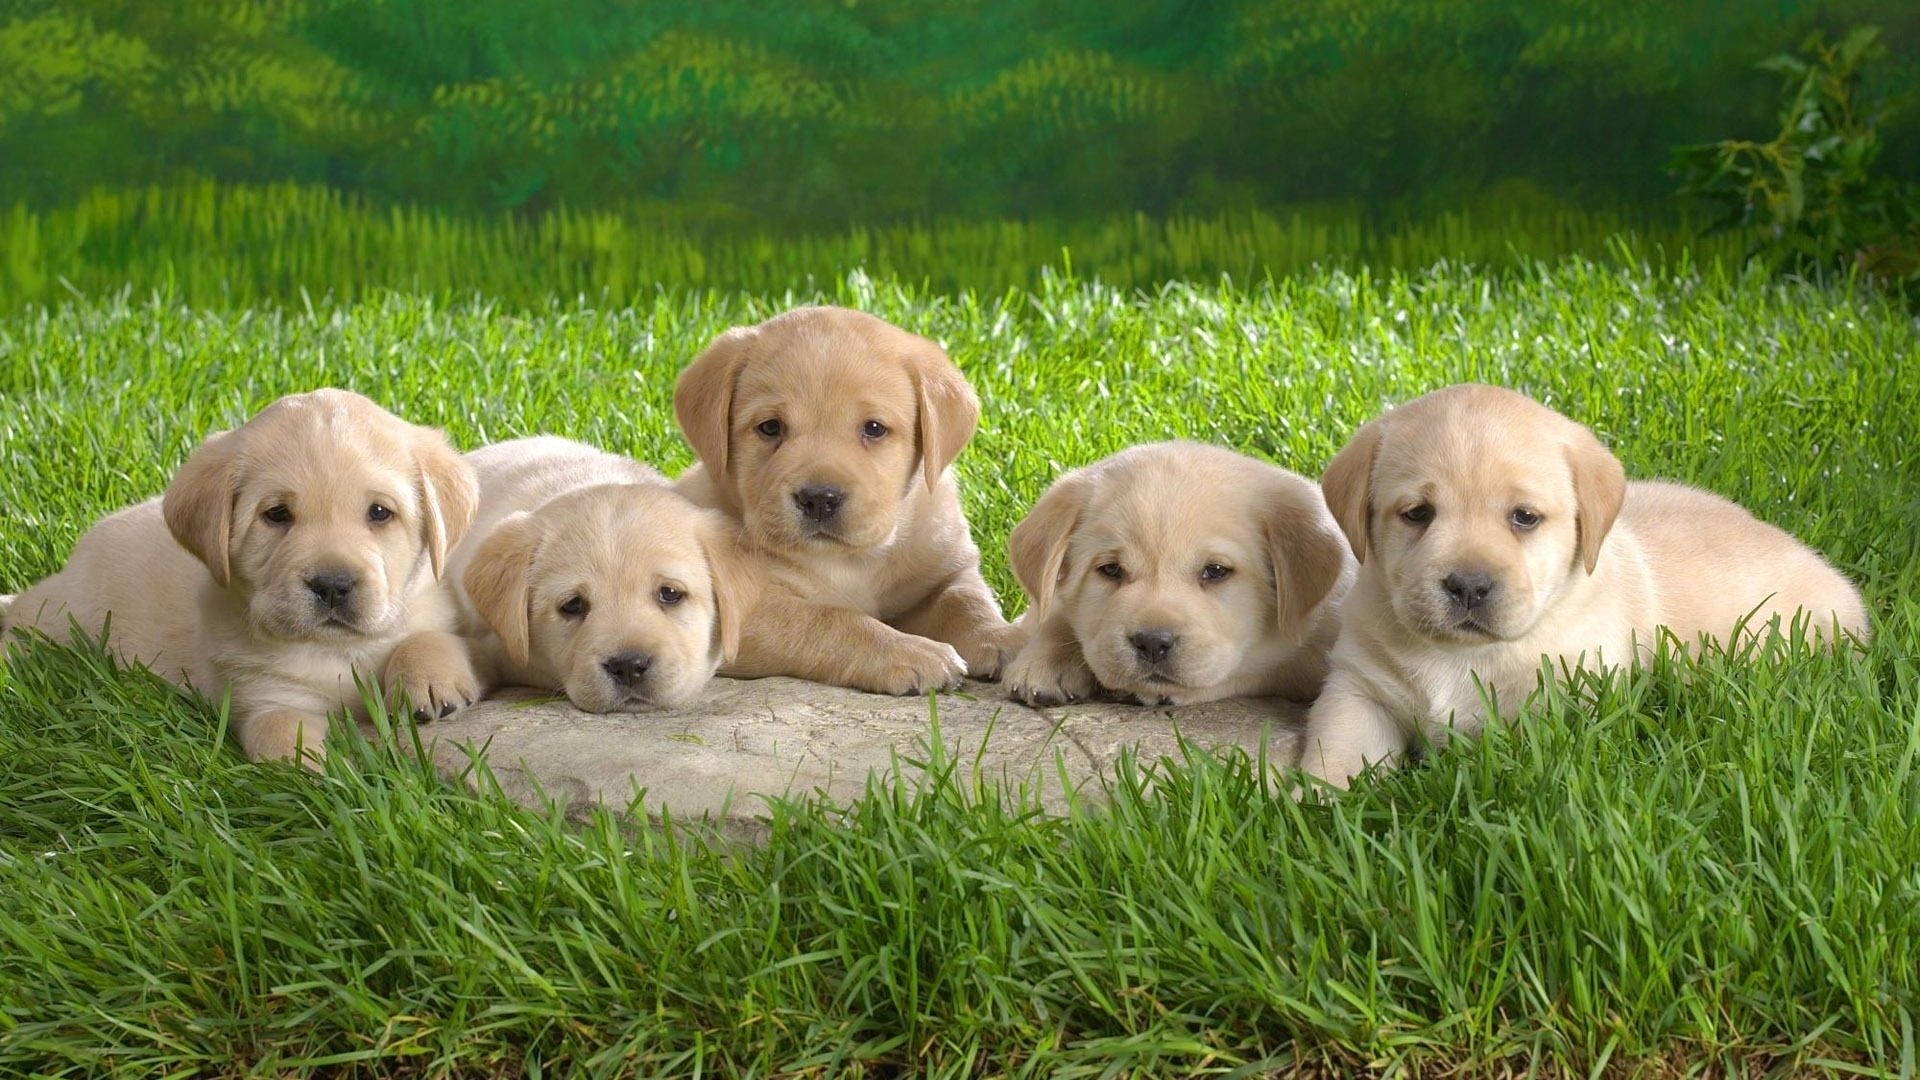 Baby Animal Puppies On The Field Wallpaper